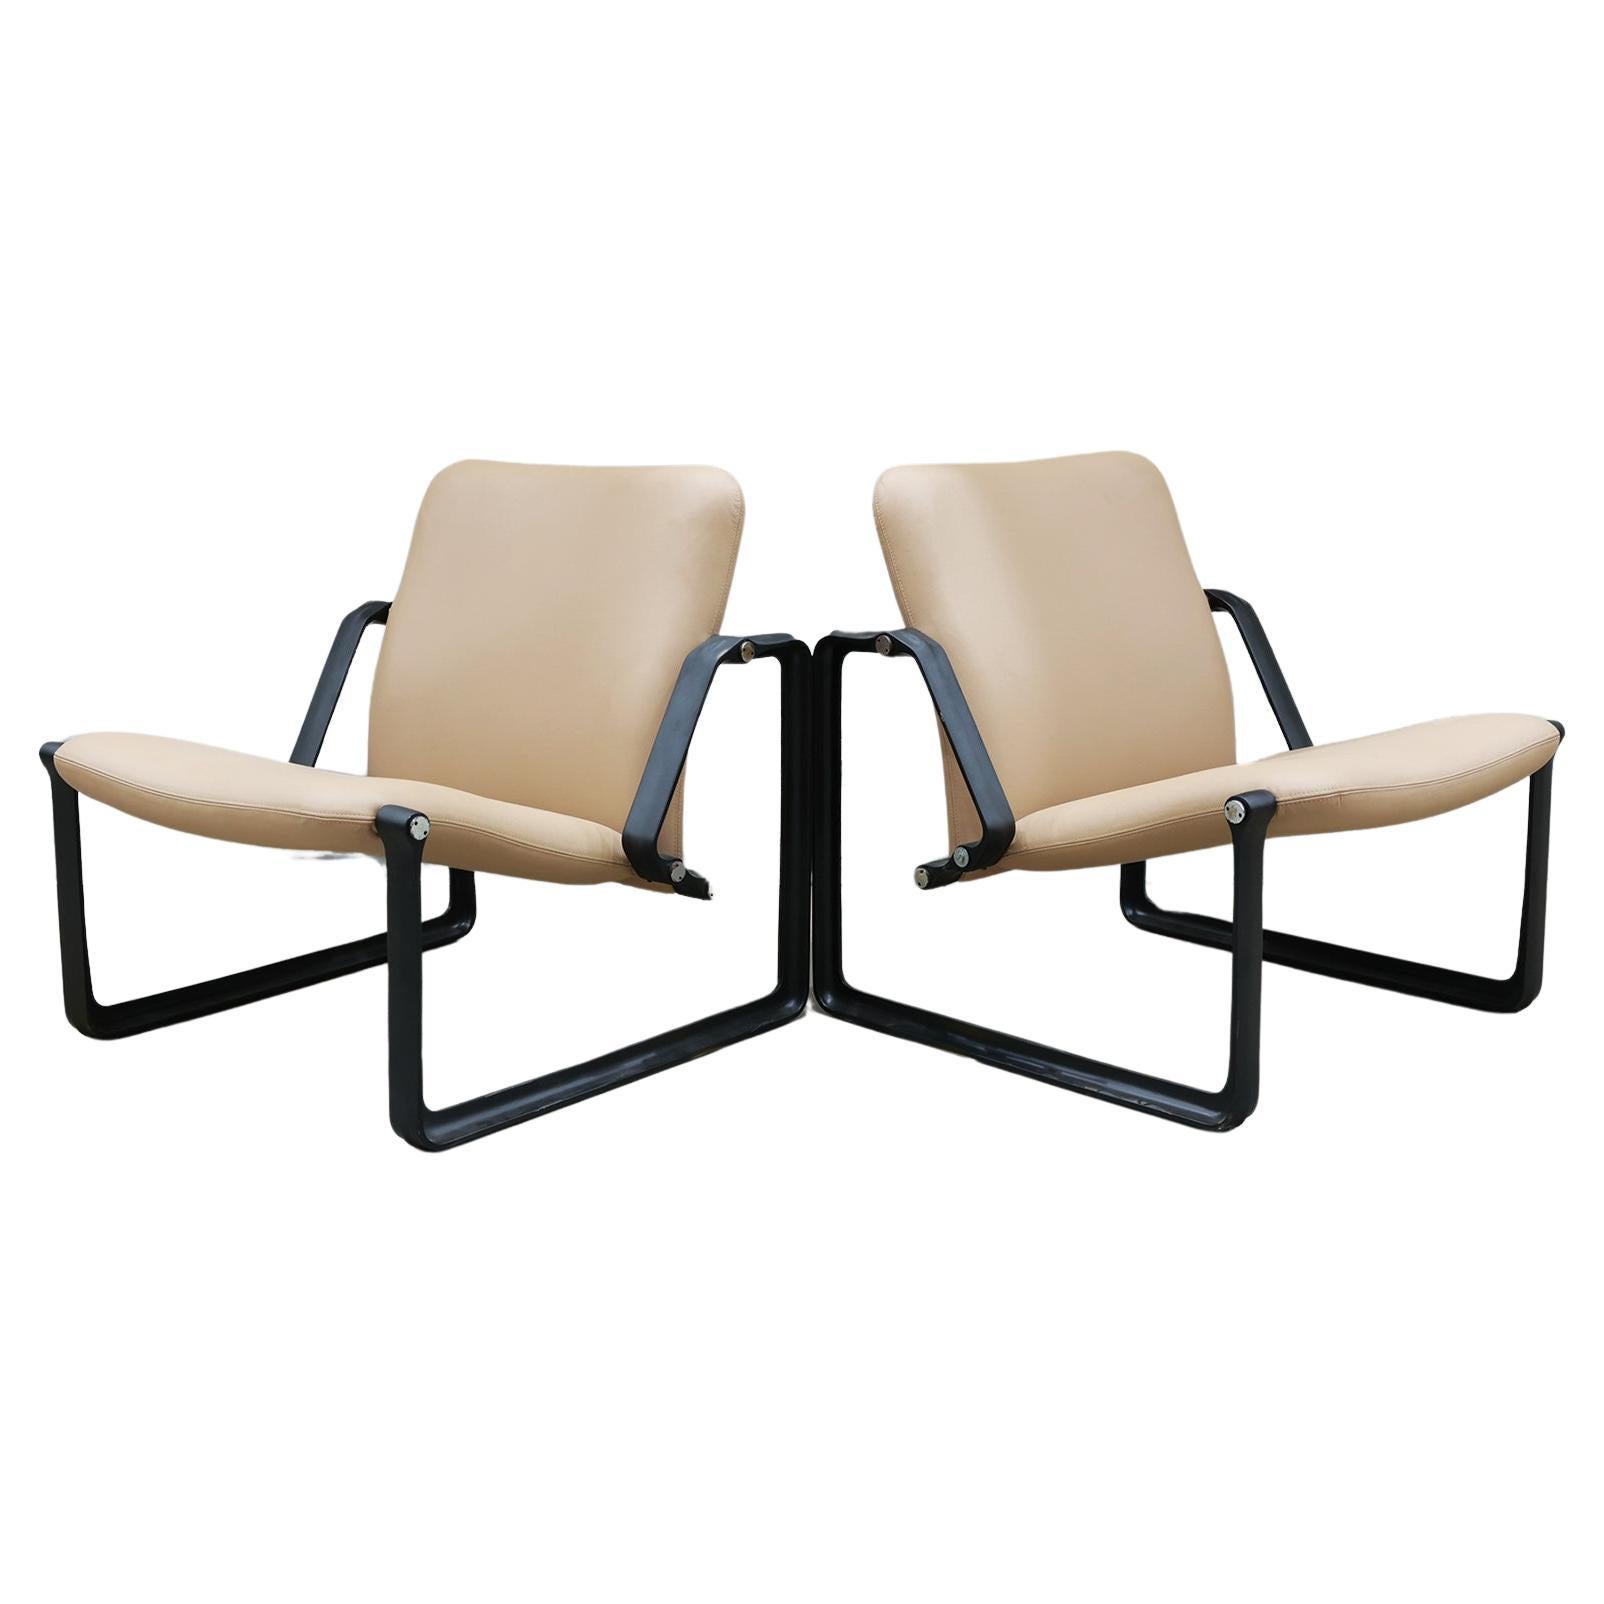 Brazilian Modern “Lobby” armchairs by Jorge Zalszupin in metal and leather, 1970